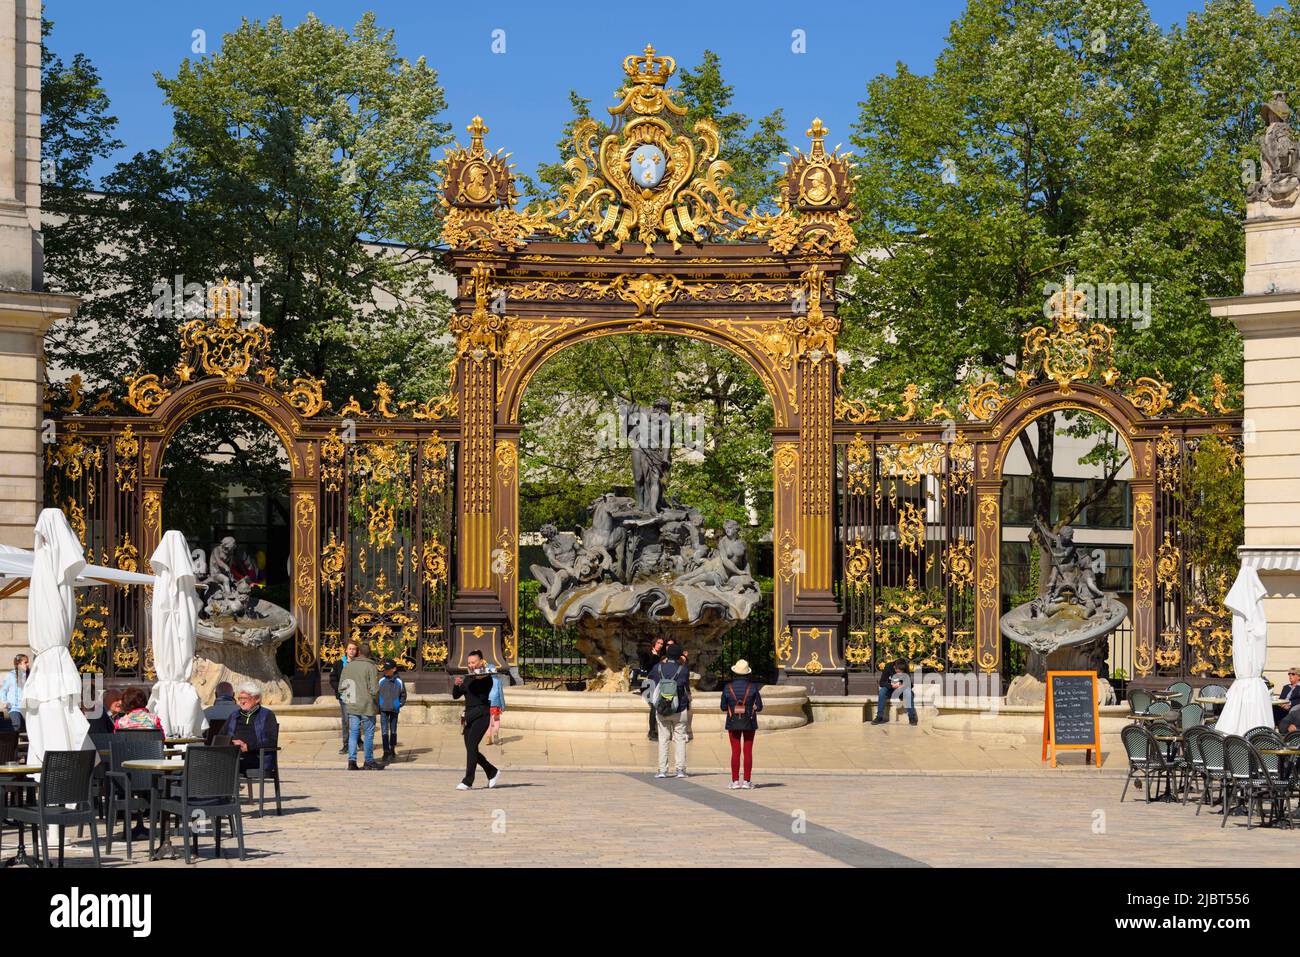 France, Meurthe et Moselle, Nancy, Place Stanislas (former Place Royale) built by Stanislas Leszczynski, King of Poland and last Duke of Lorraine in the eighteenth century, listed as World Heritage by UNESCO, Neptune fountain designed by Guibal and gates enhanced with gold of Jean Lamour Stock Photo